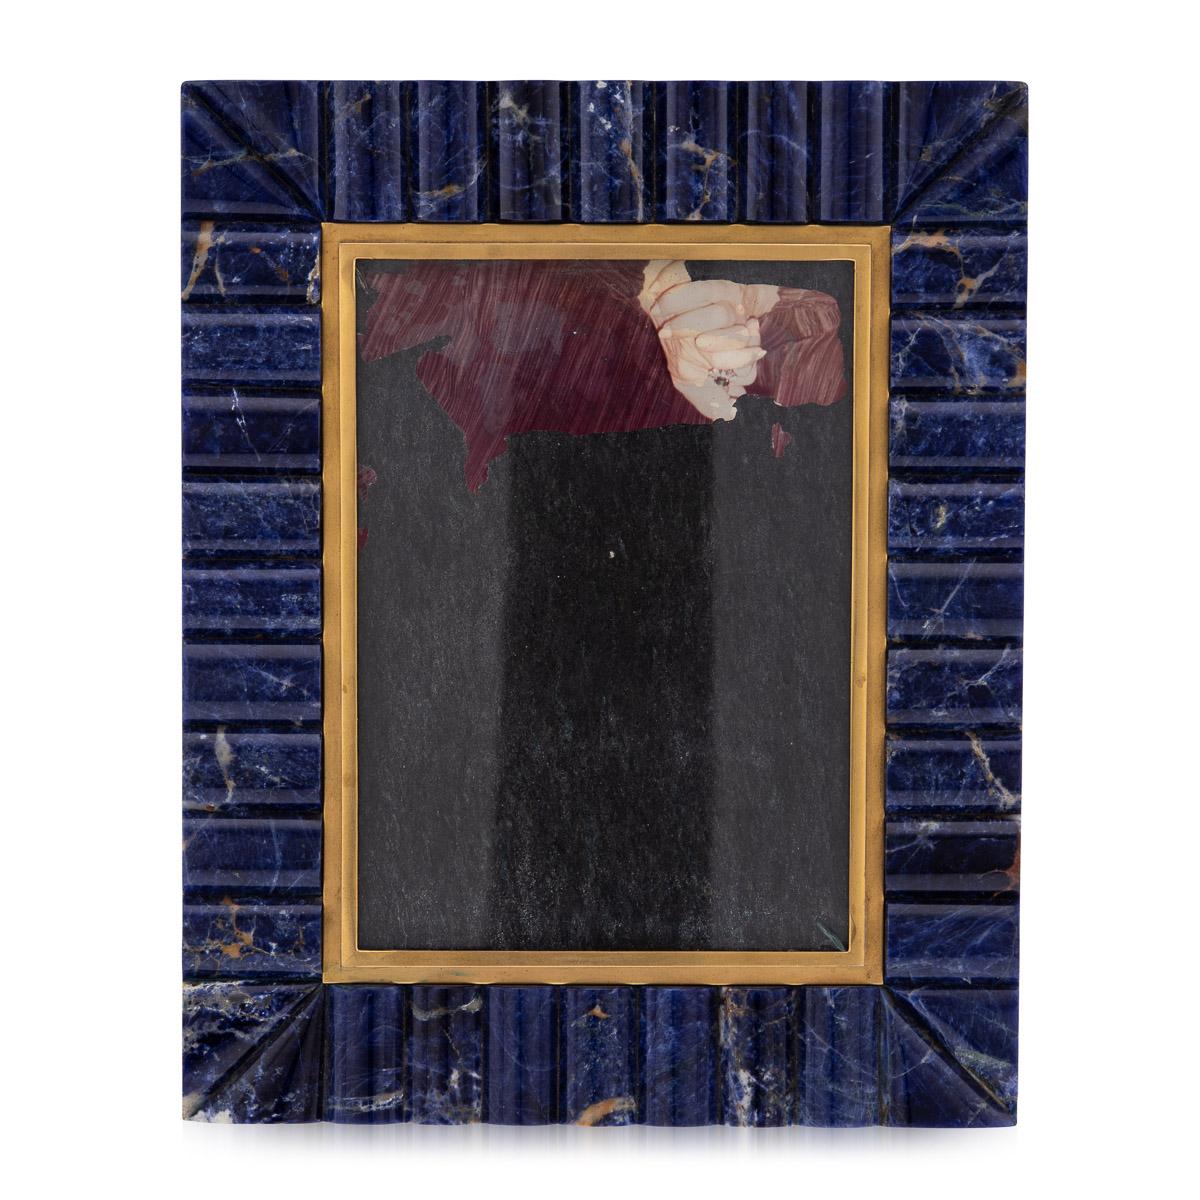 A very attractive photograph frame made by Christian Dior, made in France around the turn of the century. The yellow metal frame surrounded by a polished, fluted sodalite border mimicking lapis lazuli. An elegant and modern take on the traditional